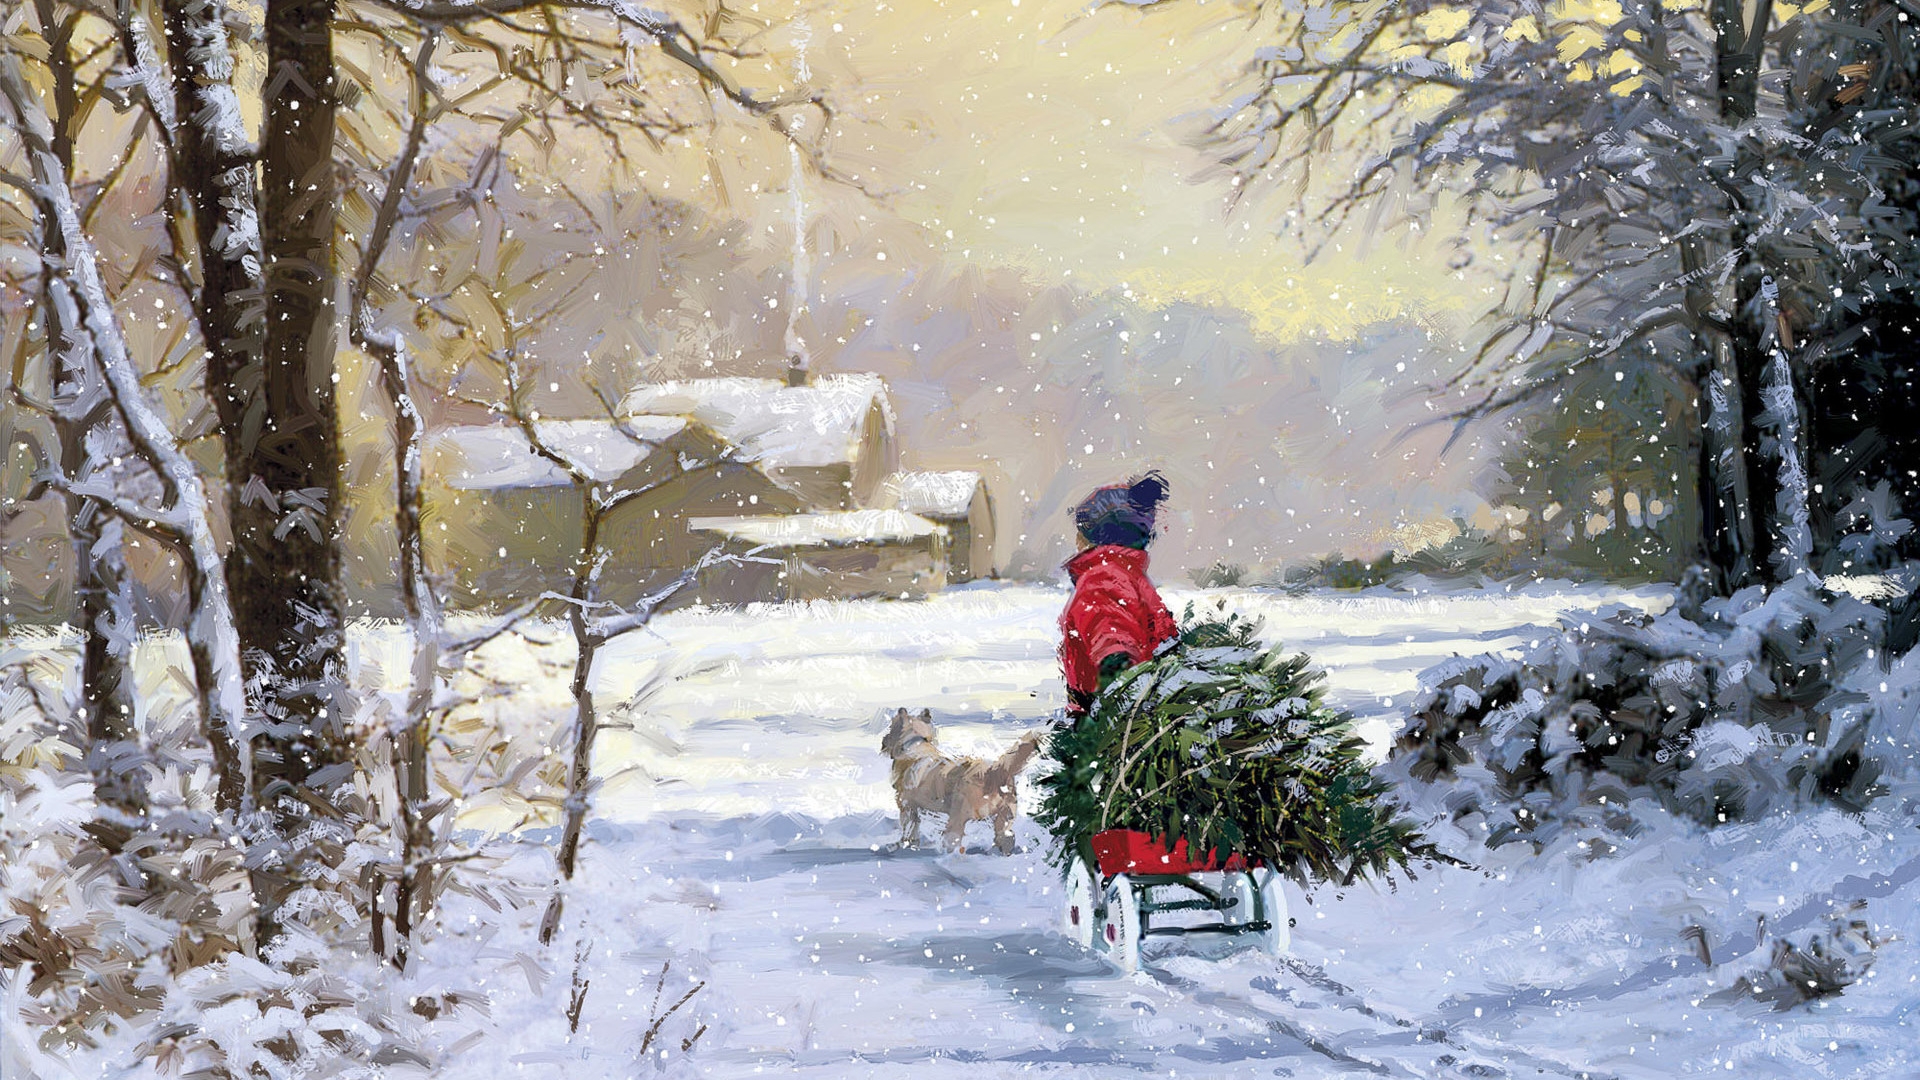 Free download 1920x1080 Carrying the Christmas tree desktop